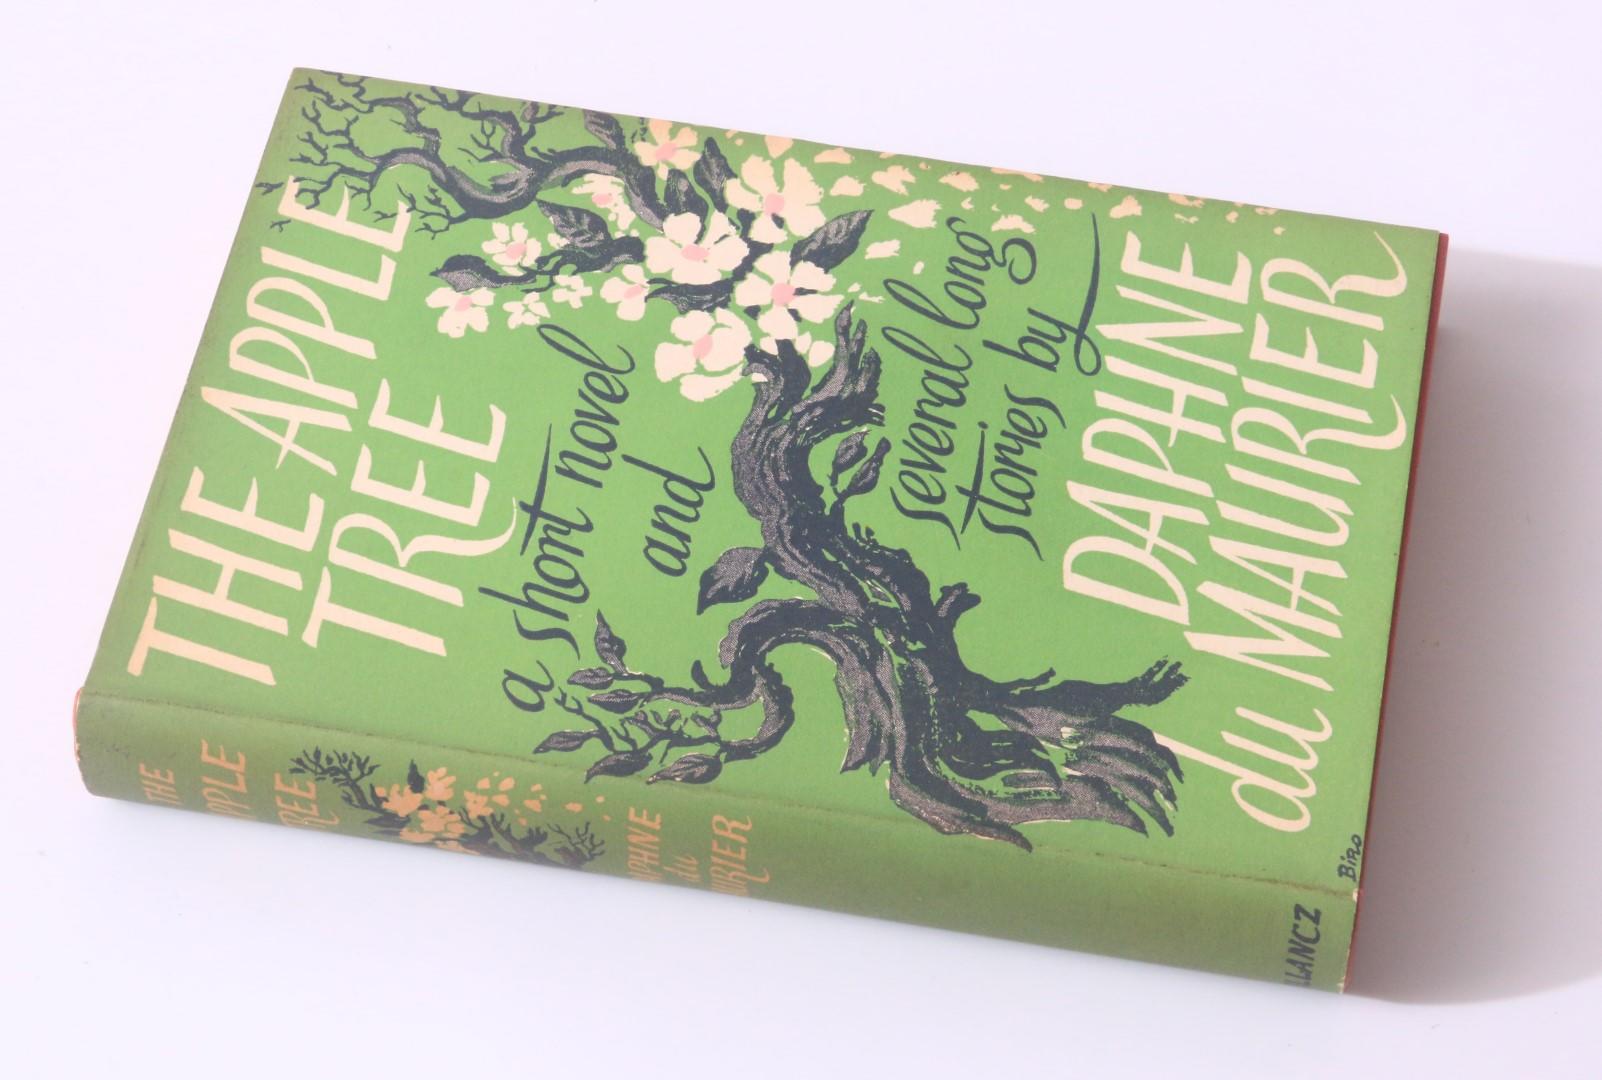 Daphne Du Maurier - The Apple Tree: A Short Novel and Several Long Stories - Gollancz, 1952, First Edition.